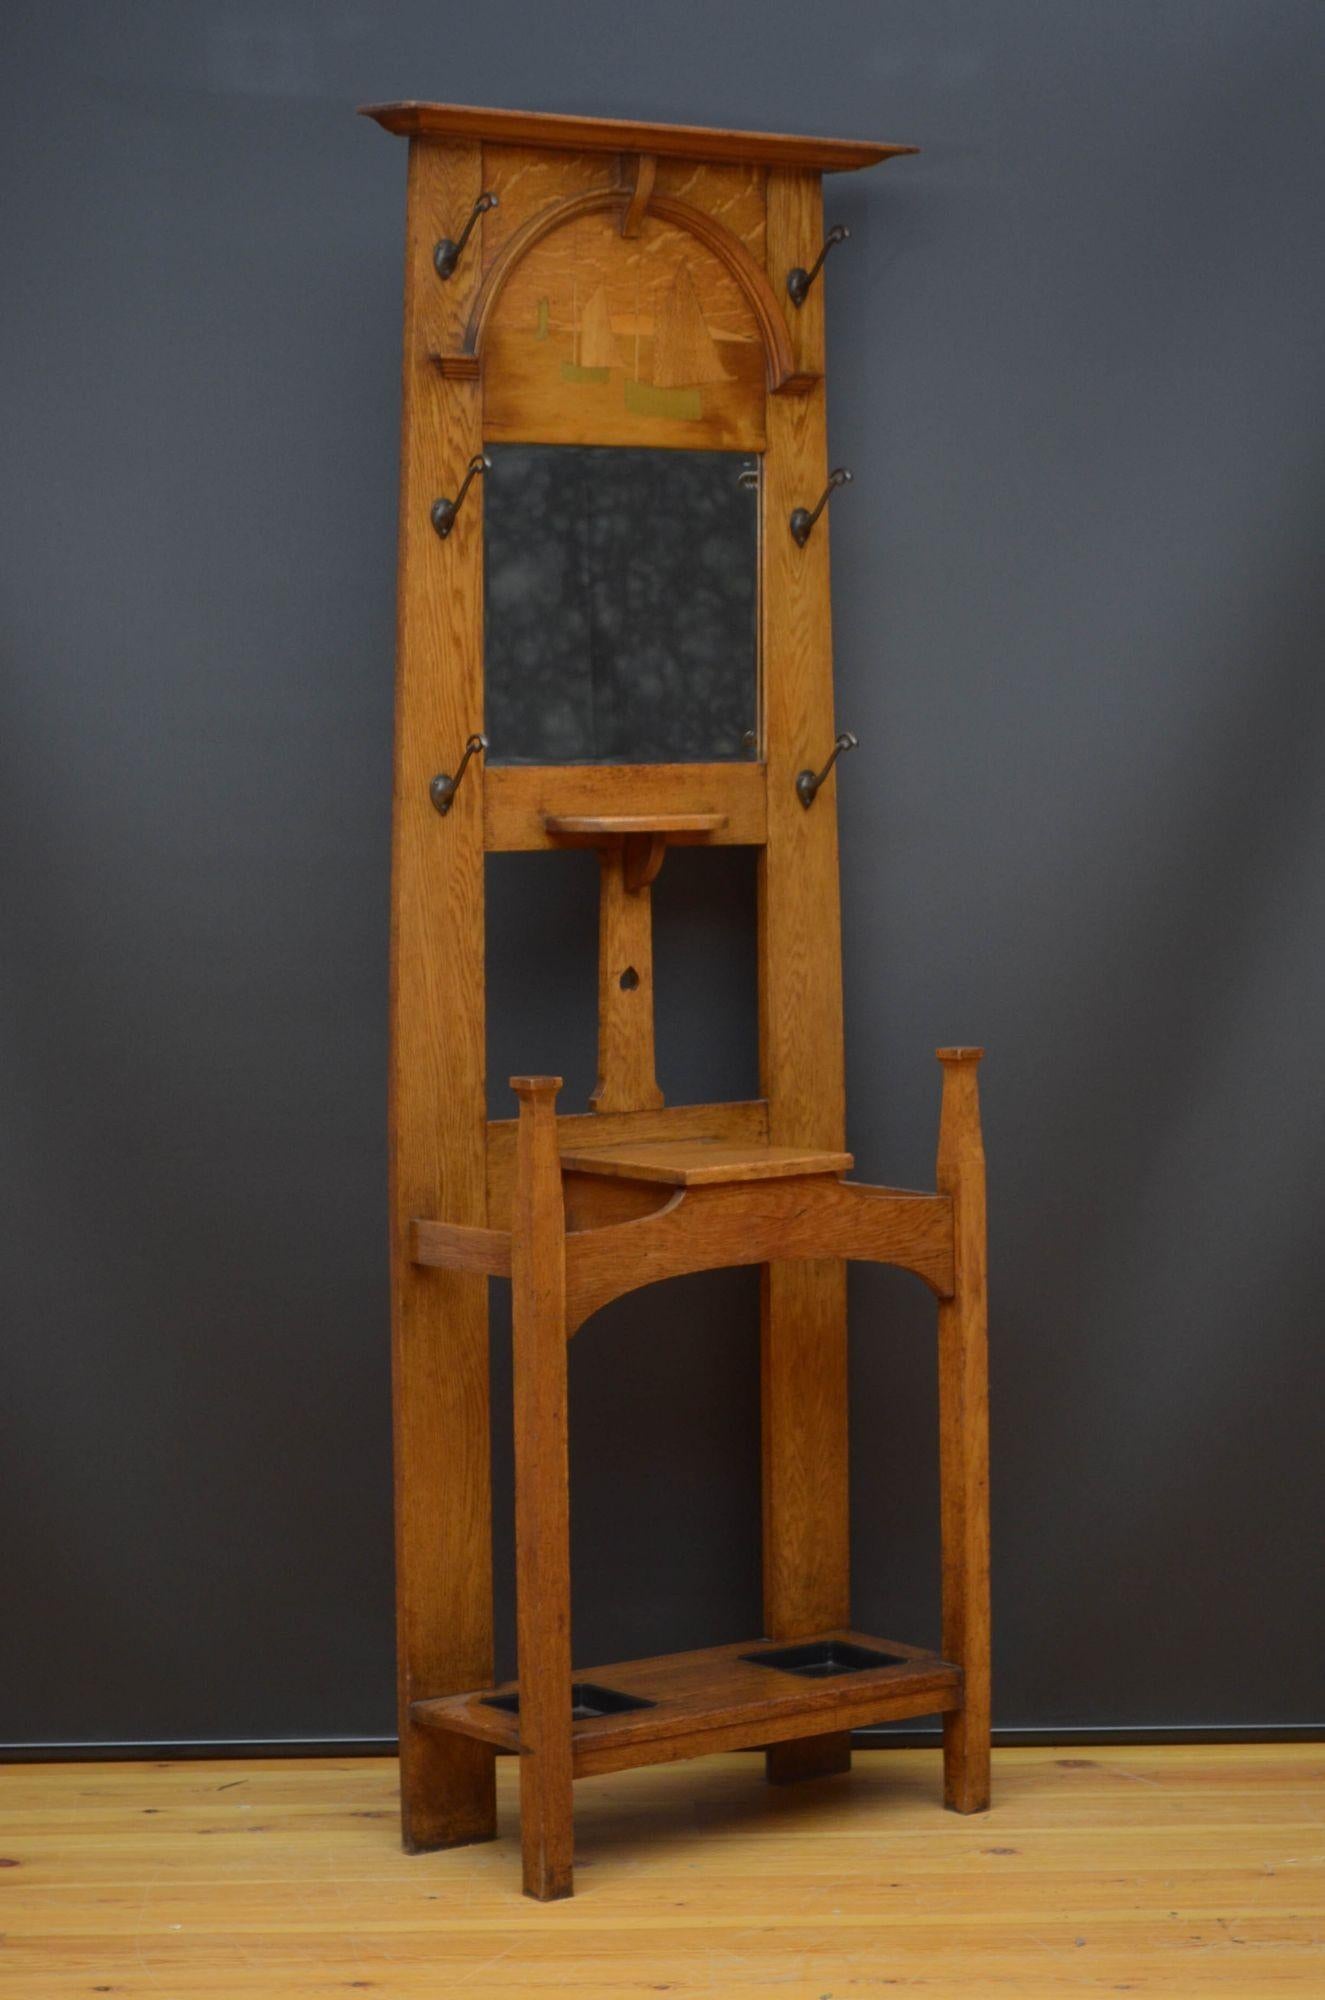 Sn5432 Arts and crafts coat stand in oak, having moulded top above ship inlaid panel, original bevelled edge mirror and a shelf flanked by six original hooks the base having small storage compartment, all standing on square legs united by undertier